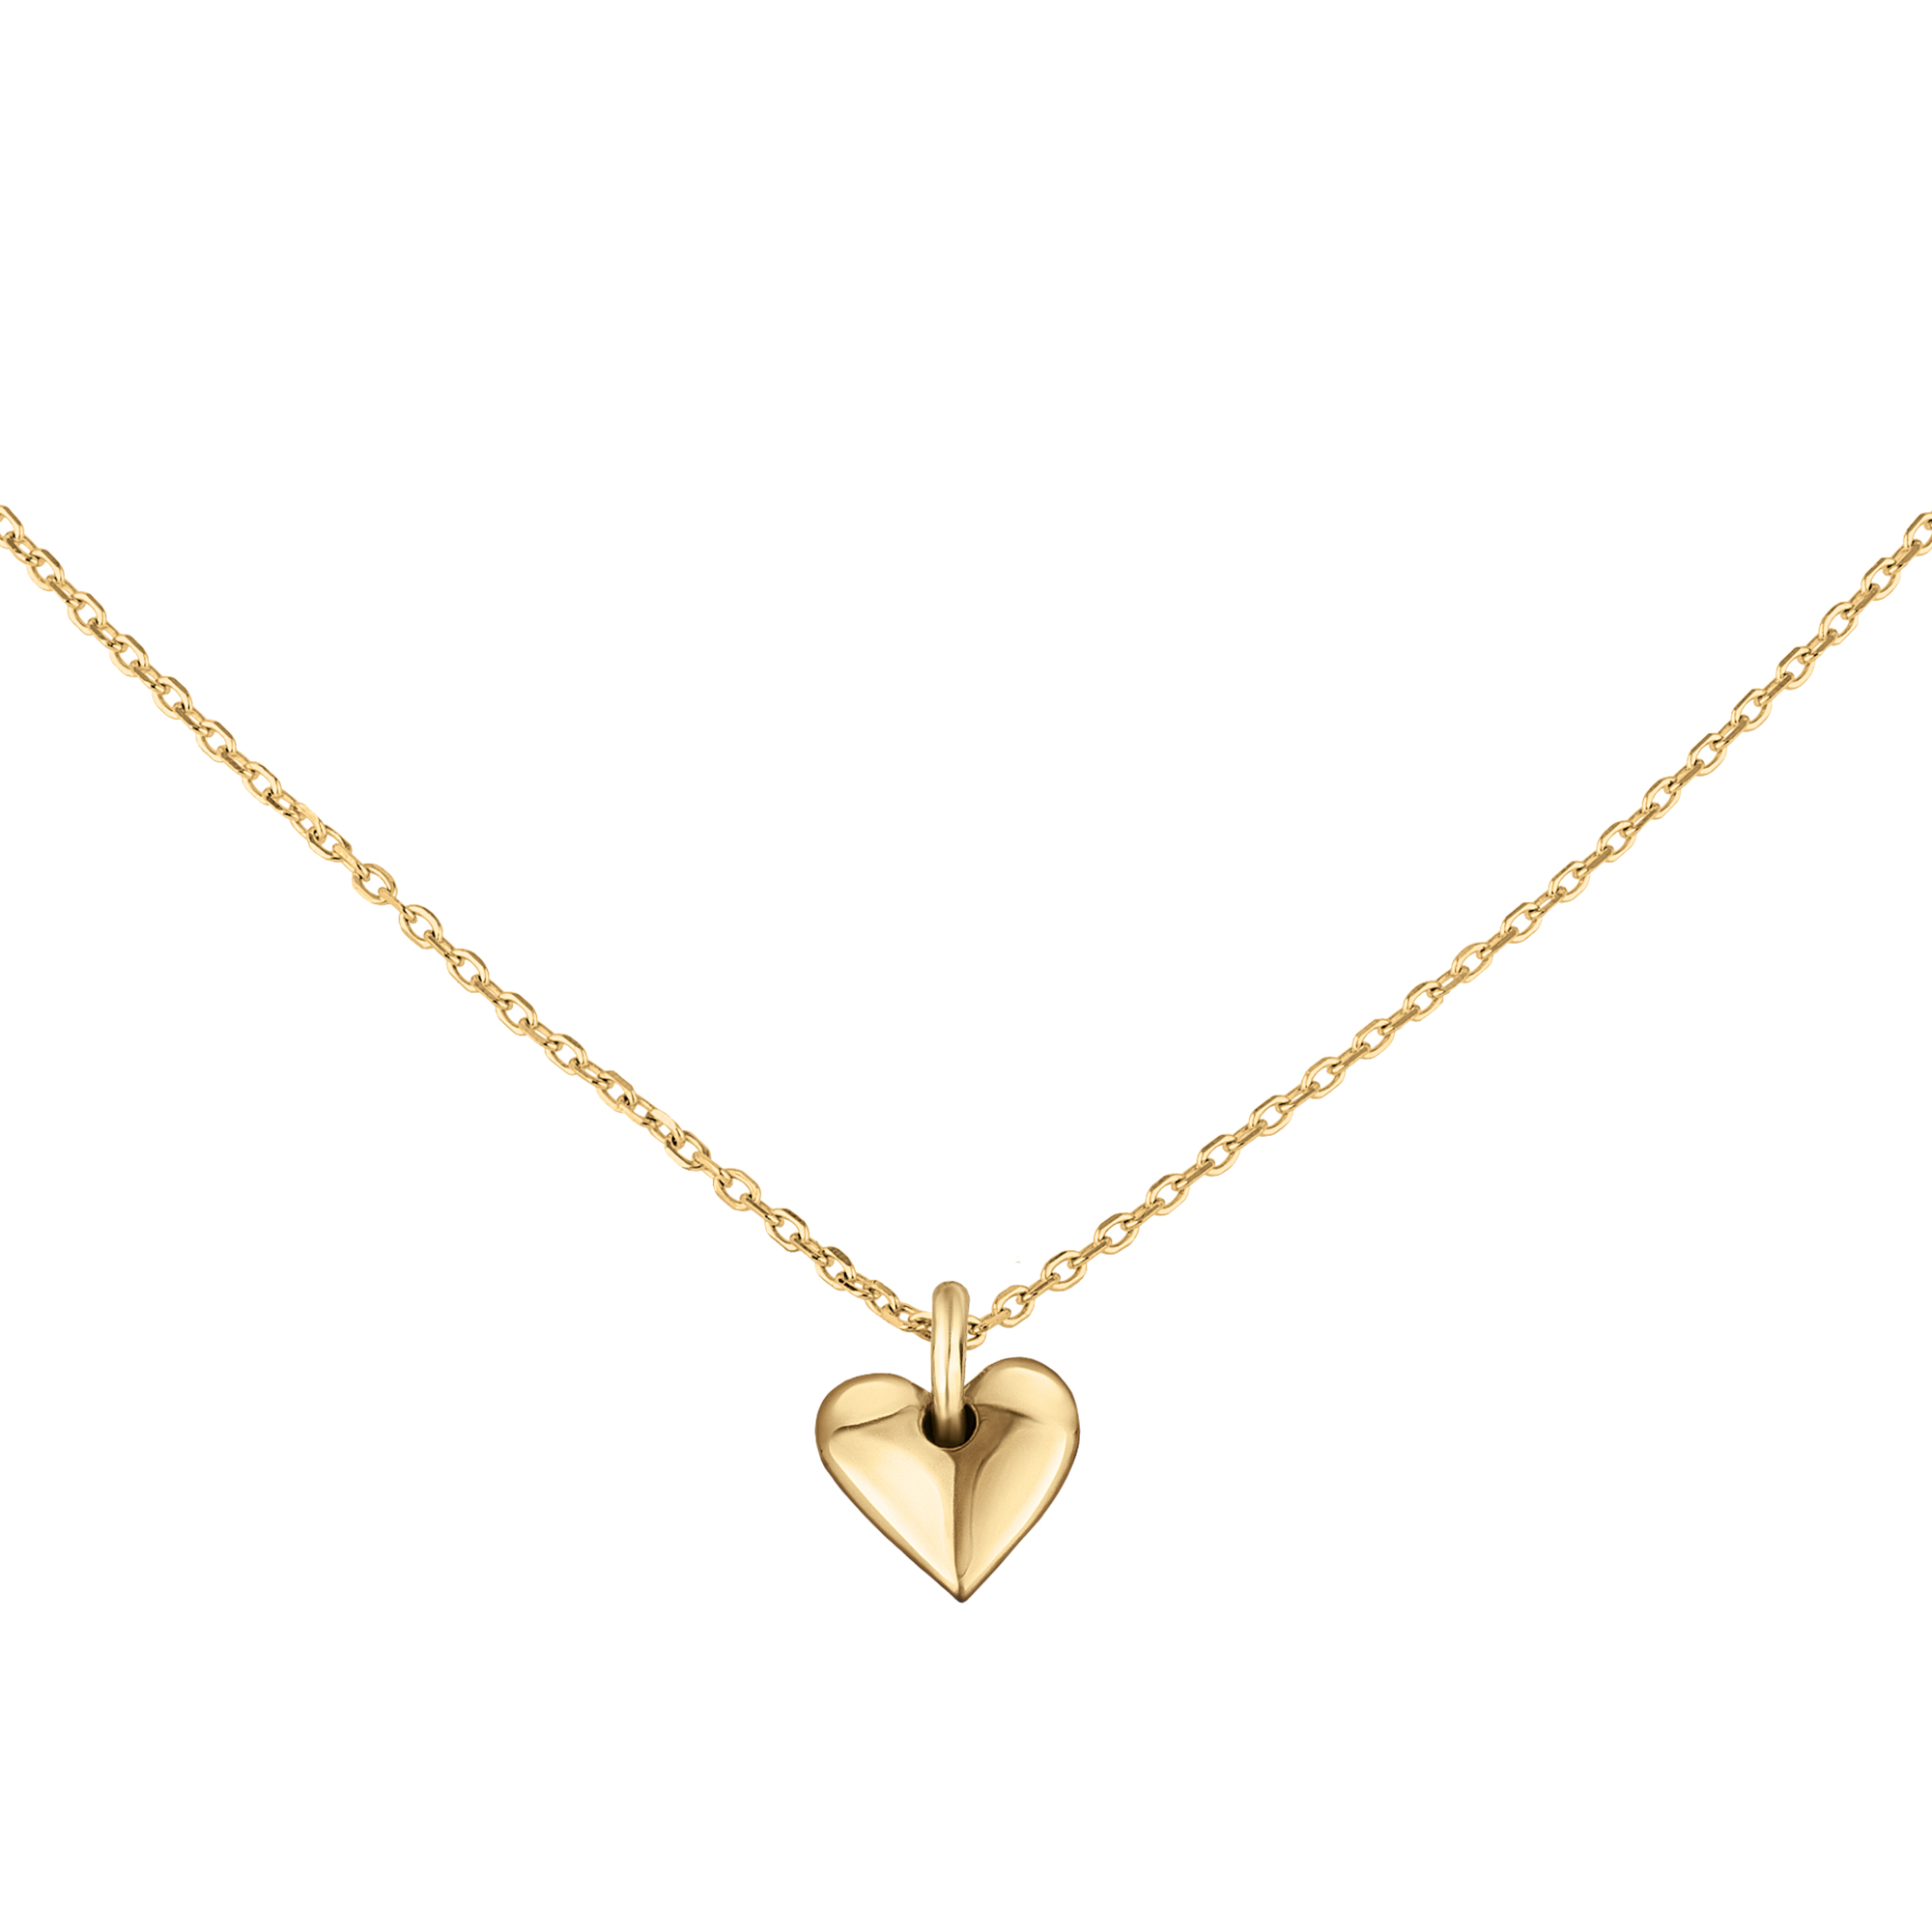 DARLING - 18K GOLD PLATED SILVER CHAIN WITH PENDANT - 2 - TJ3154 | Breil